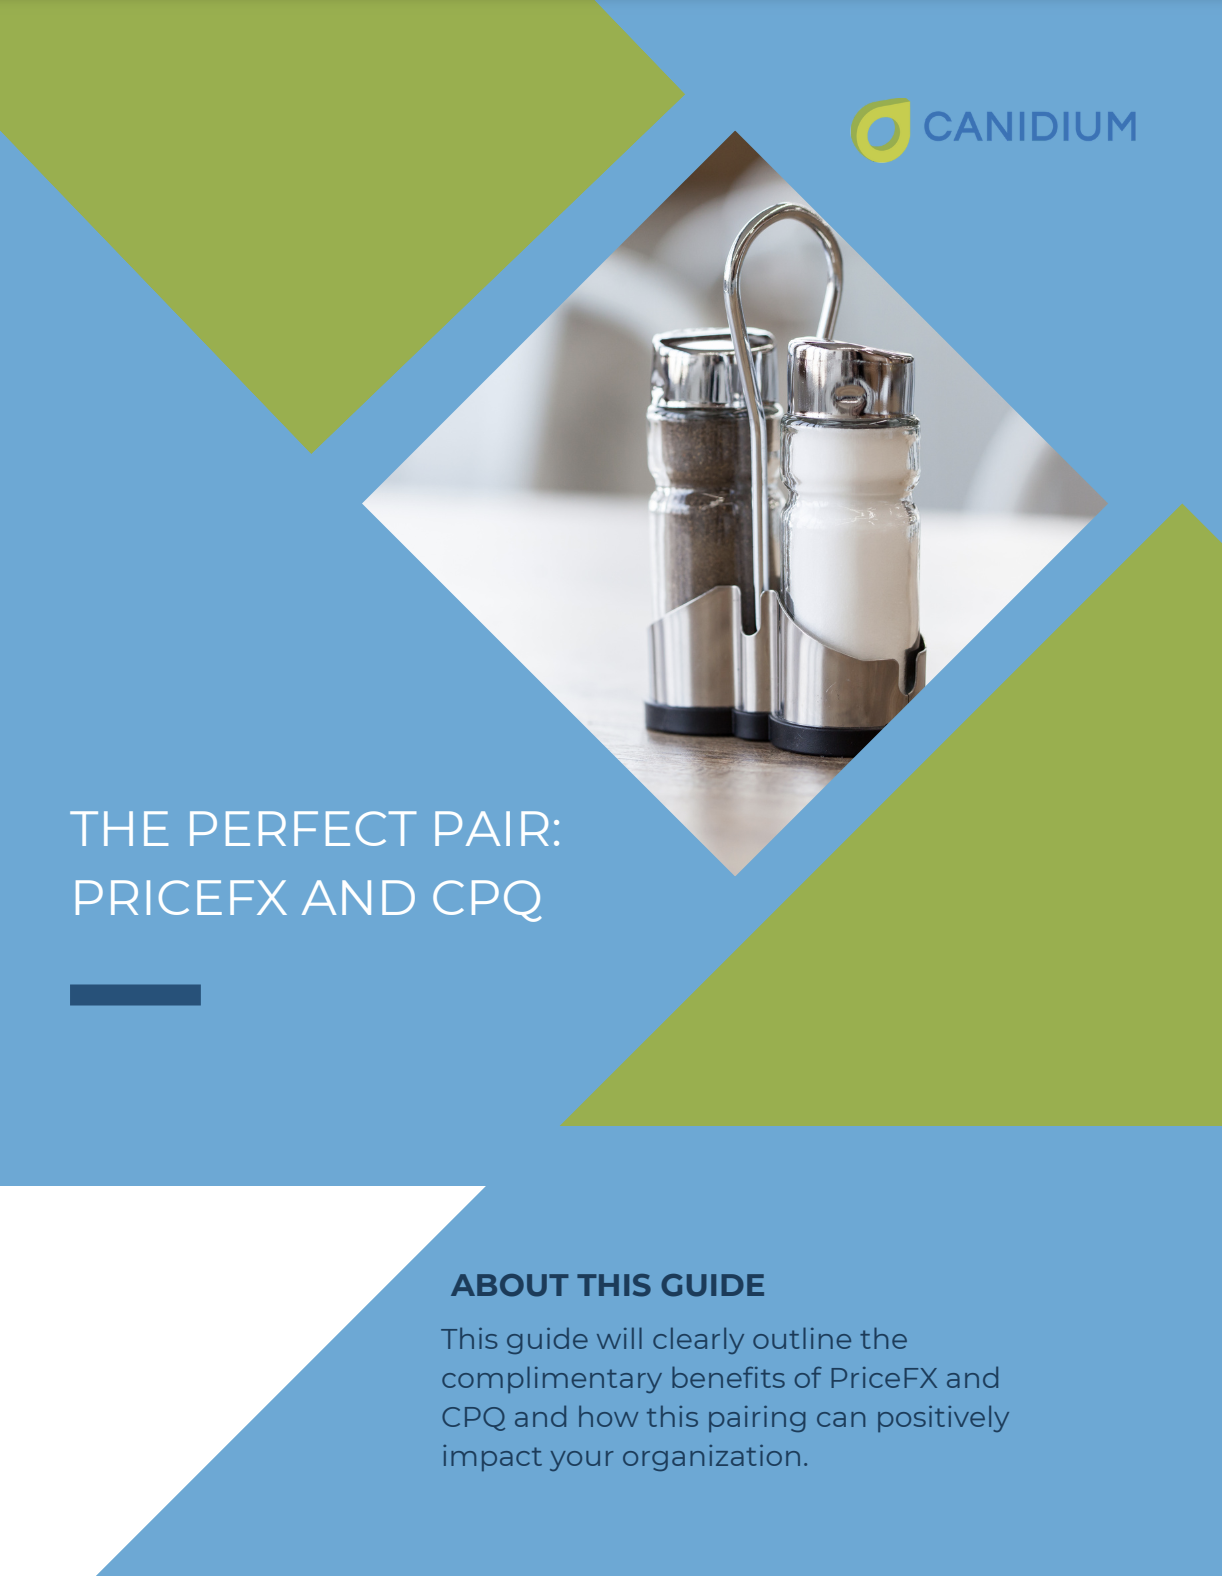 The Perfect Pair: Pricefx and CPQ